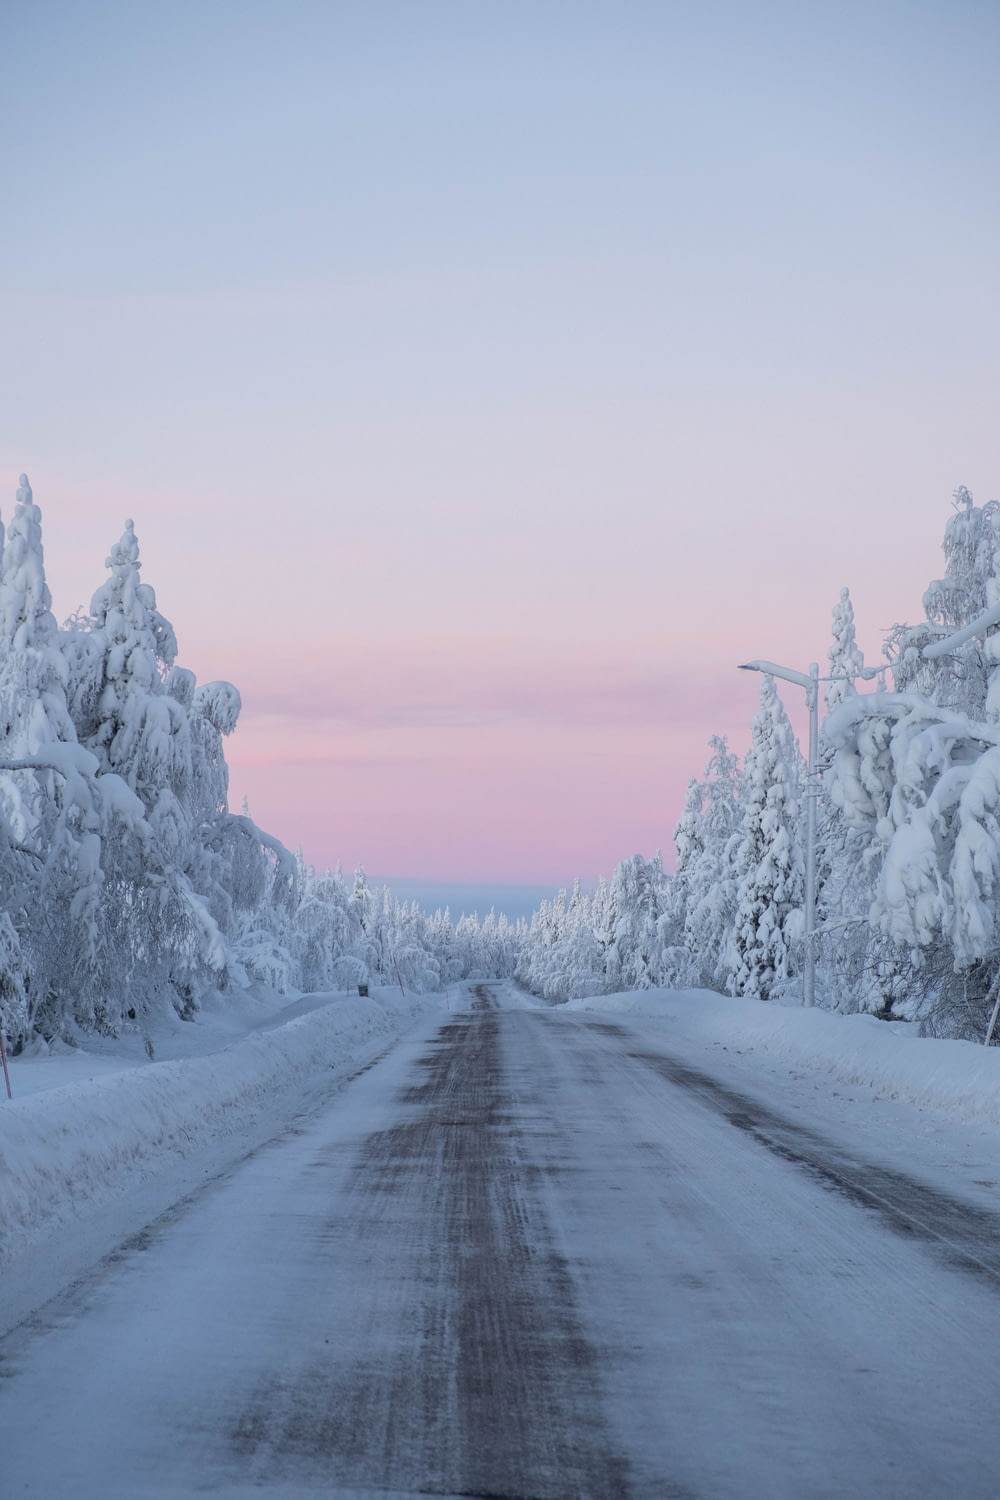 snow covered trees and road during daytime